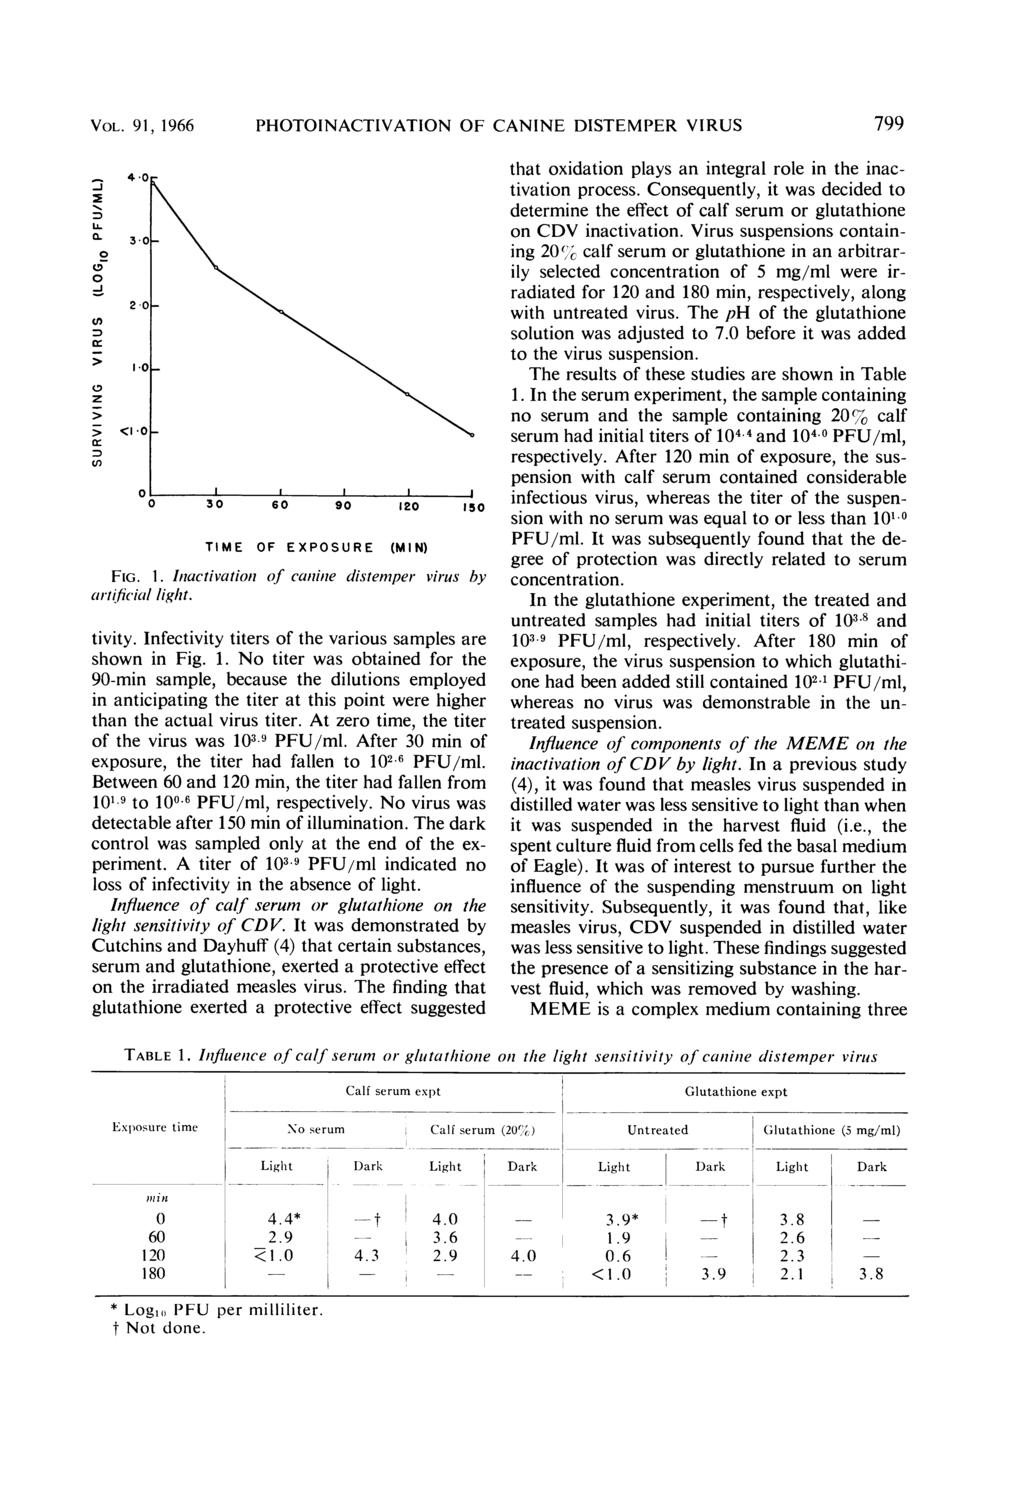 VOL. 9 1, 1 966 PHOTOINACTIVATION OF CANINE DISTEMPER VIRUS 799 that oxidation plays an integral role in the inactivation process.